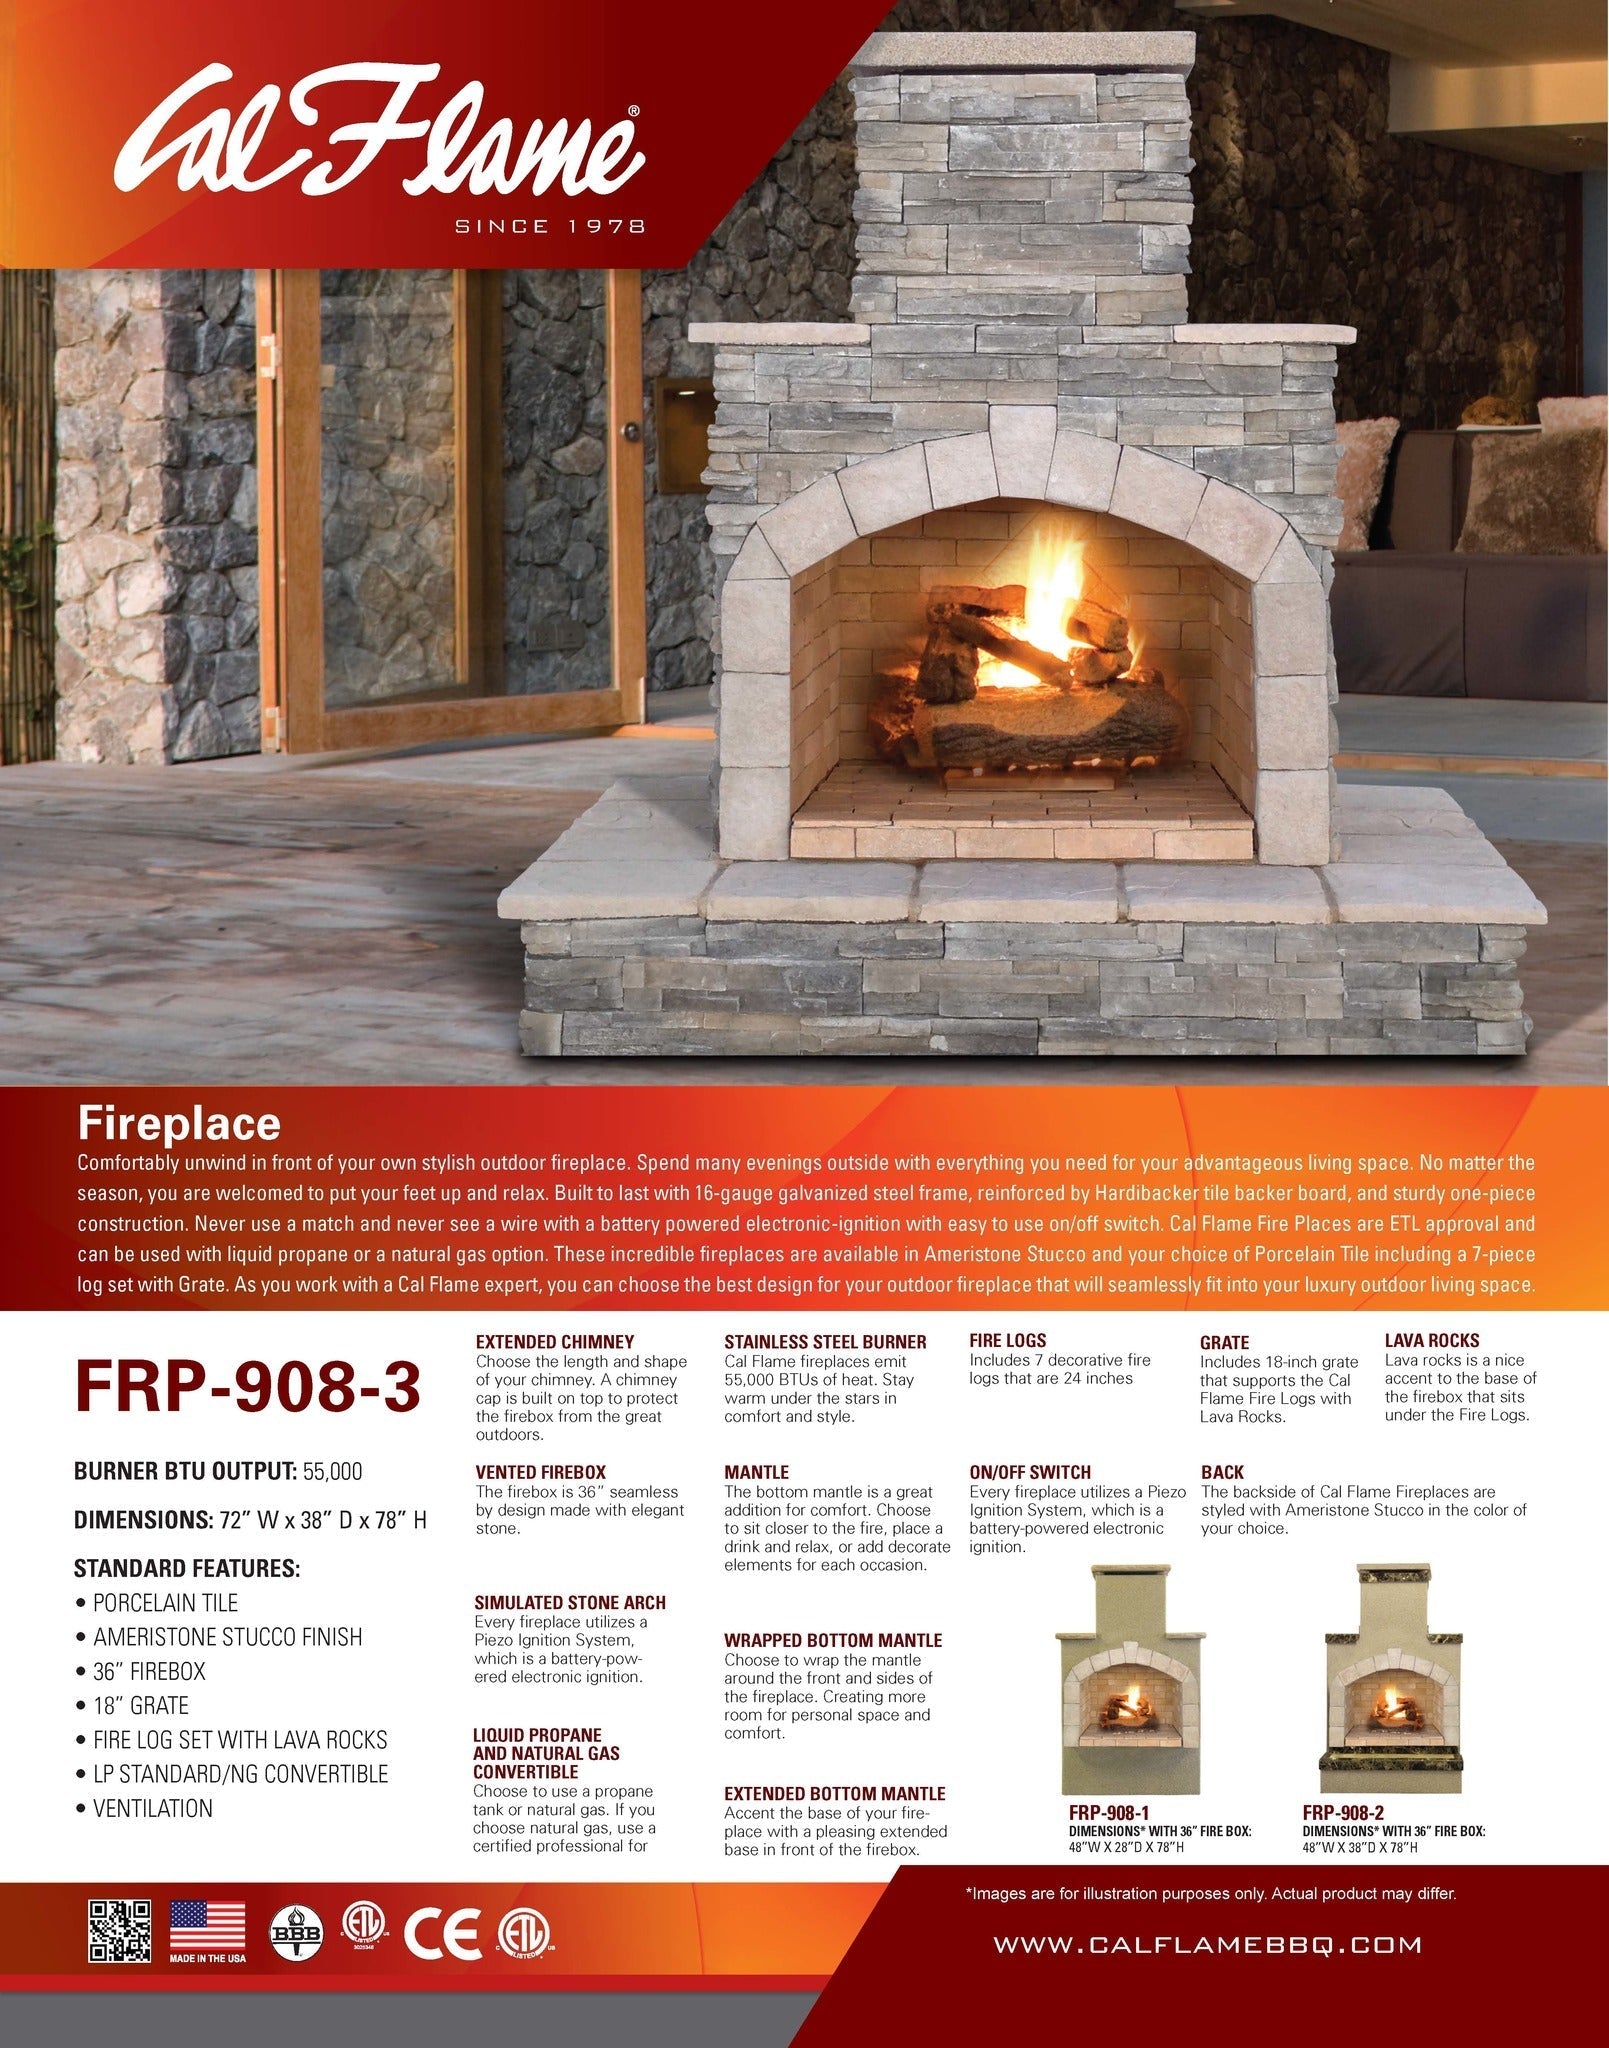 Cal Flame FRP-908-2 Fire Place